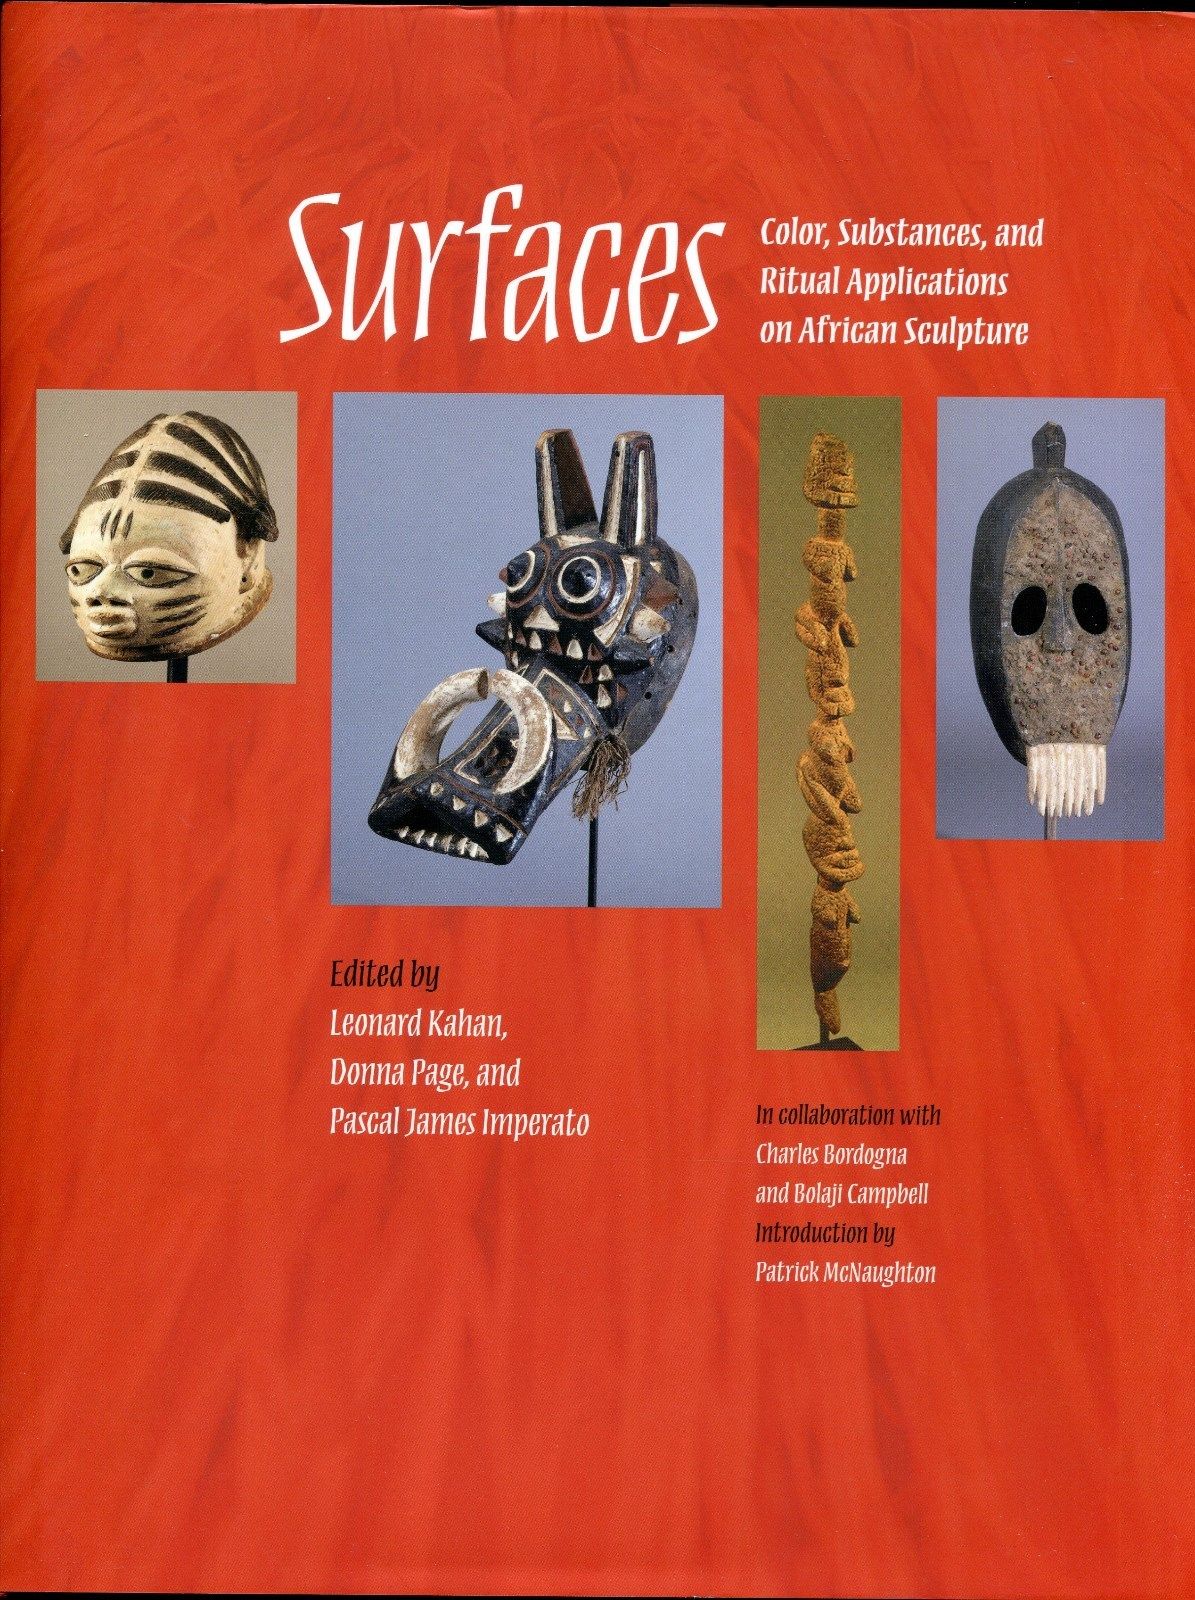 Surfaces Color Substances  and Ritual Applications on African Sculpture.jpg